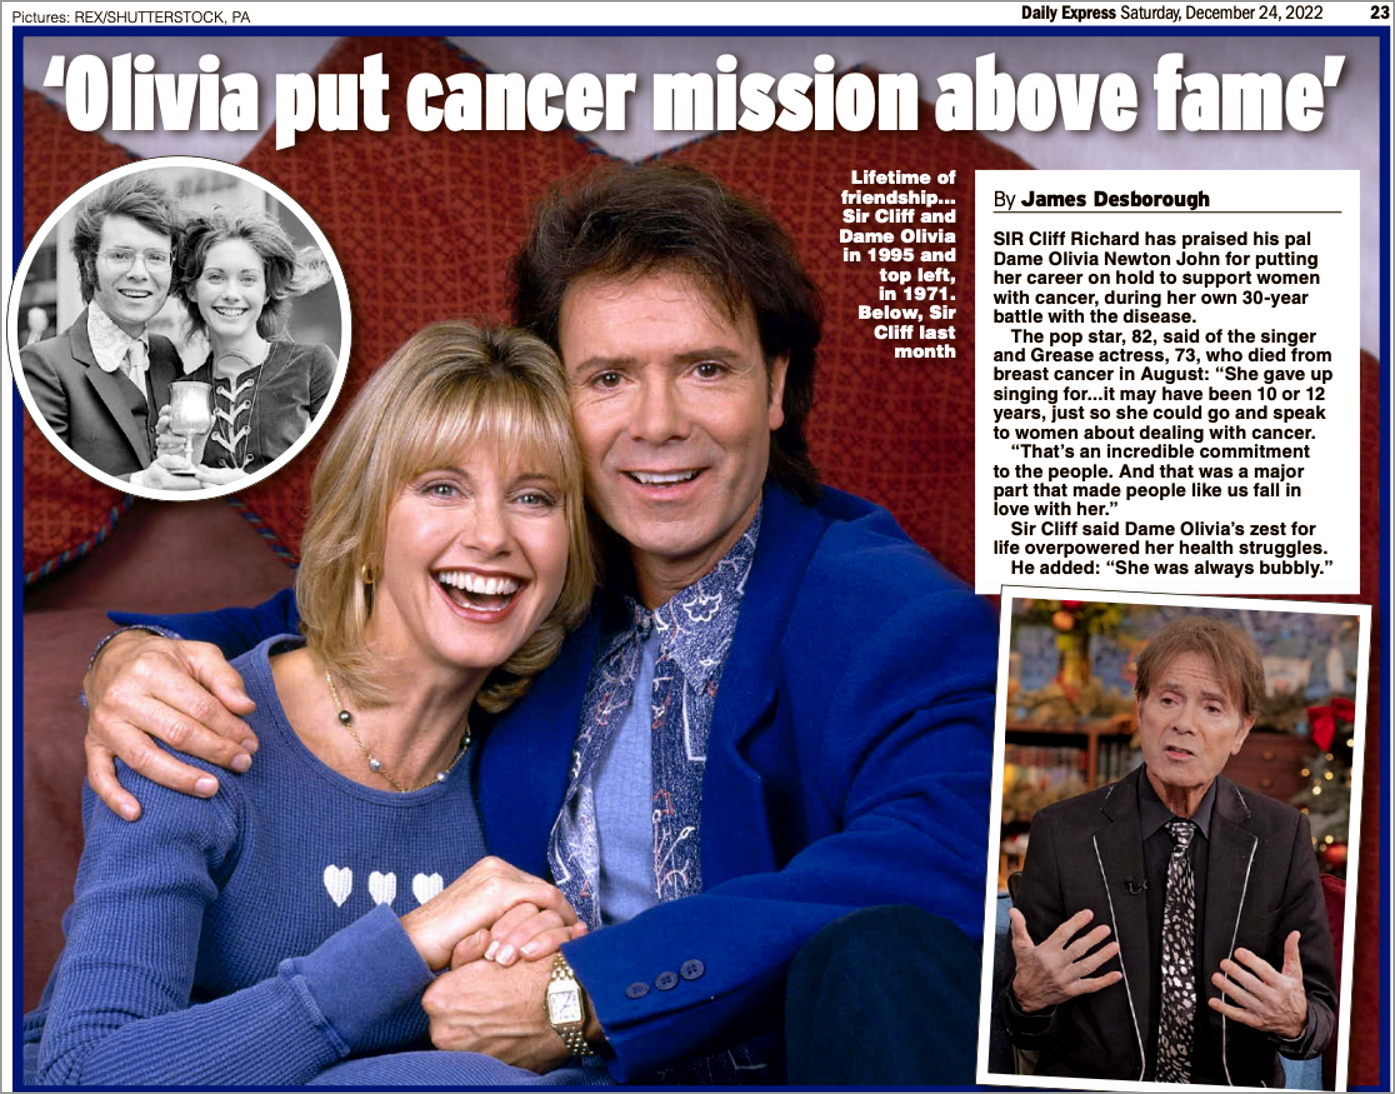 Olivia put cancer mission above fame  - Daily Express